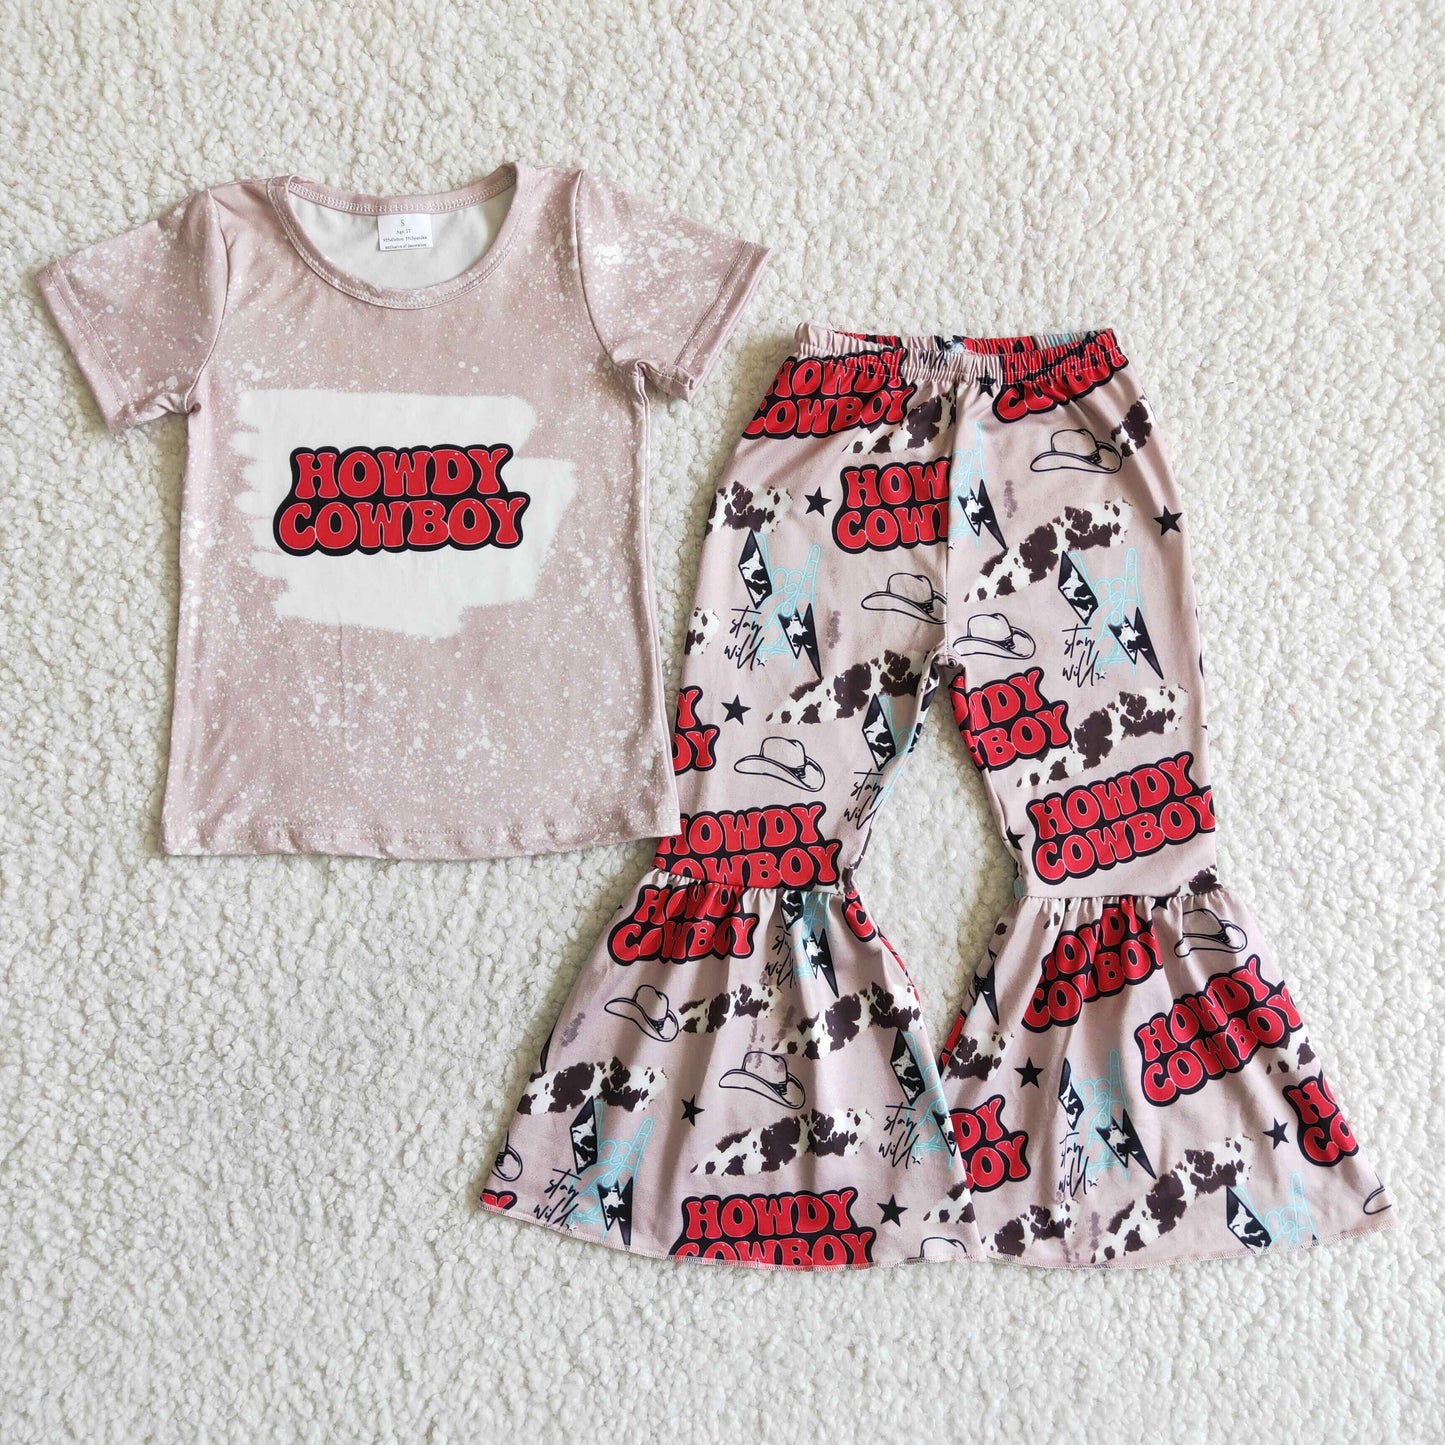 Howdy Cowboy baby girls spring summer 2pcs pants outfit  C3-30